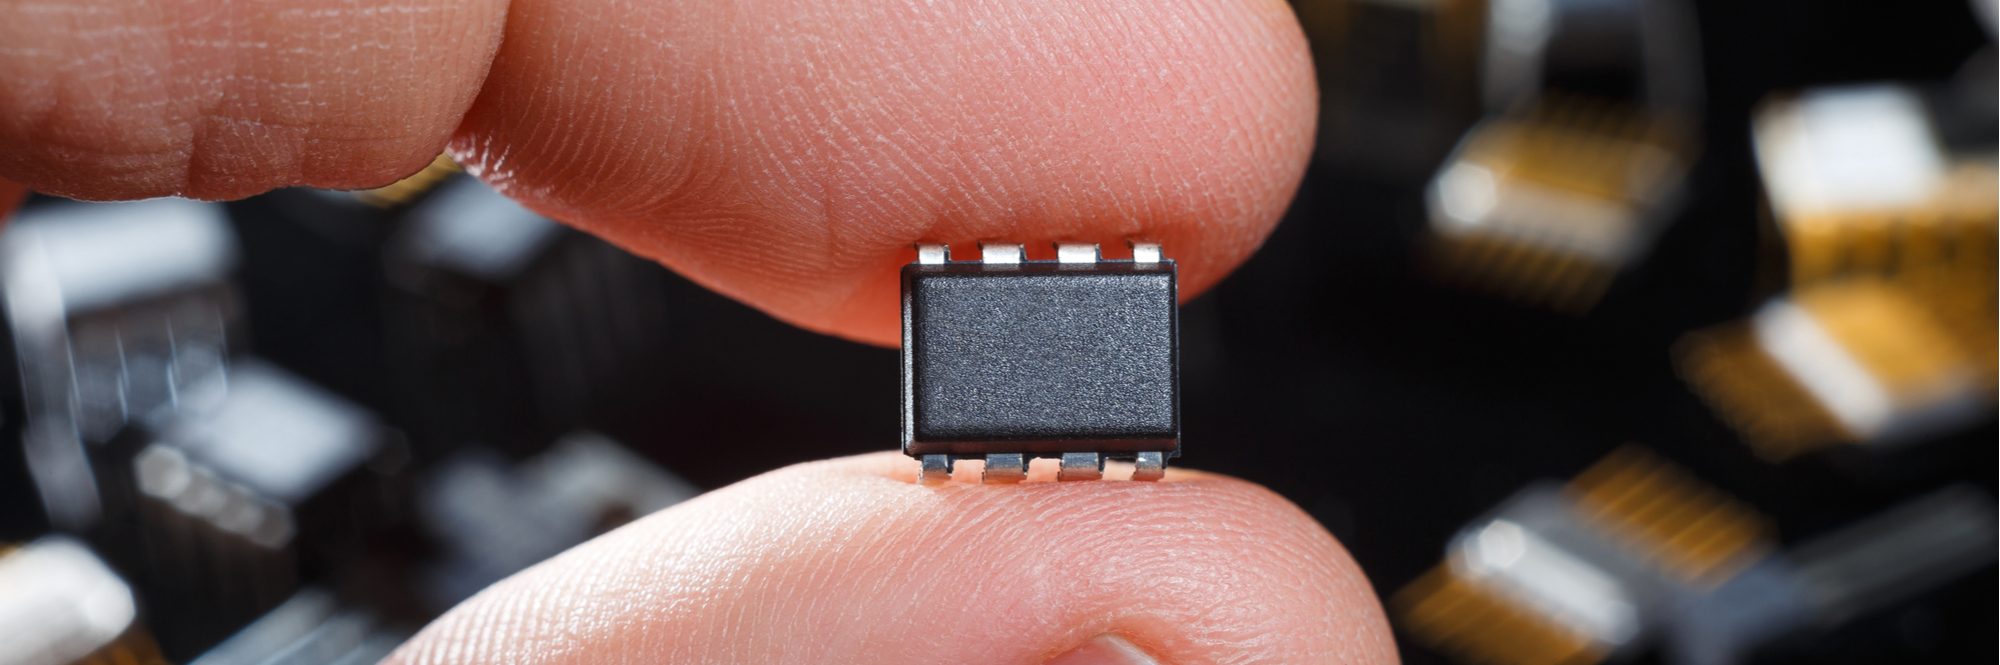 Electronic microchip with fingers close-up. Man hand holds microcircuit.